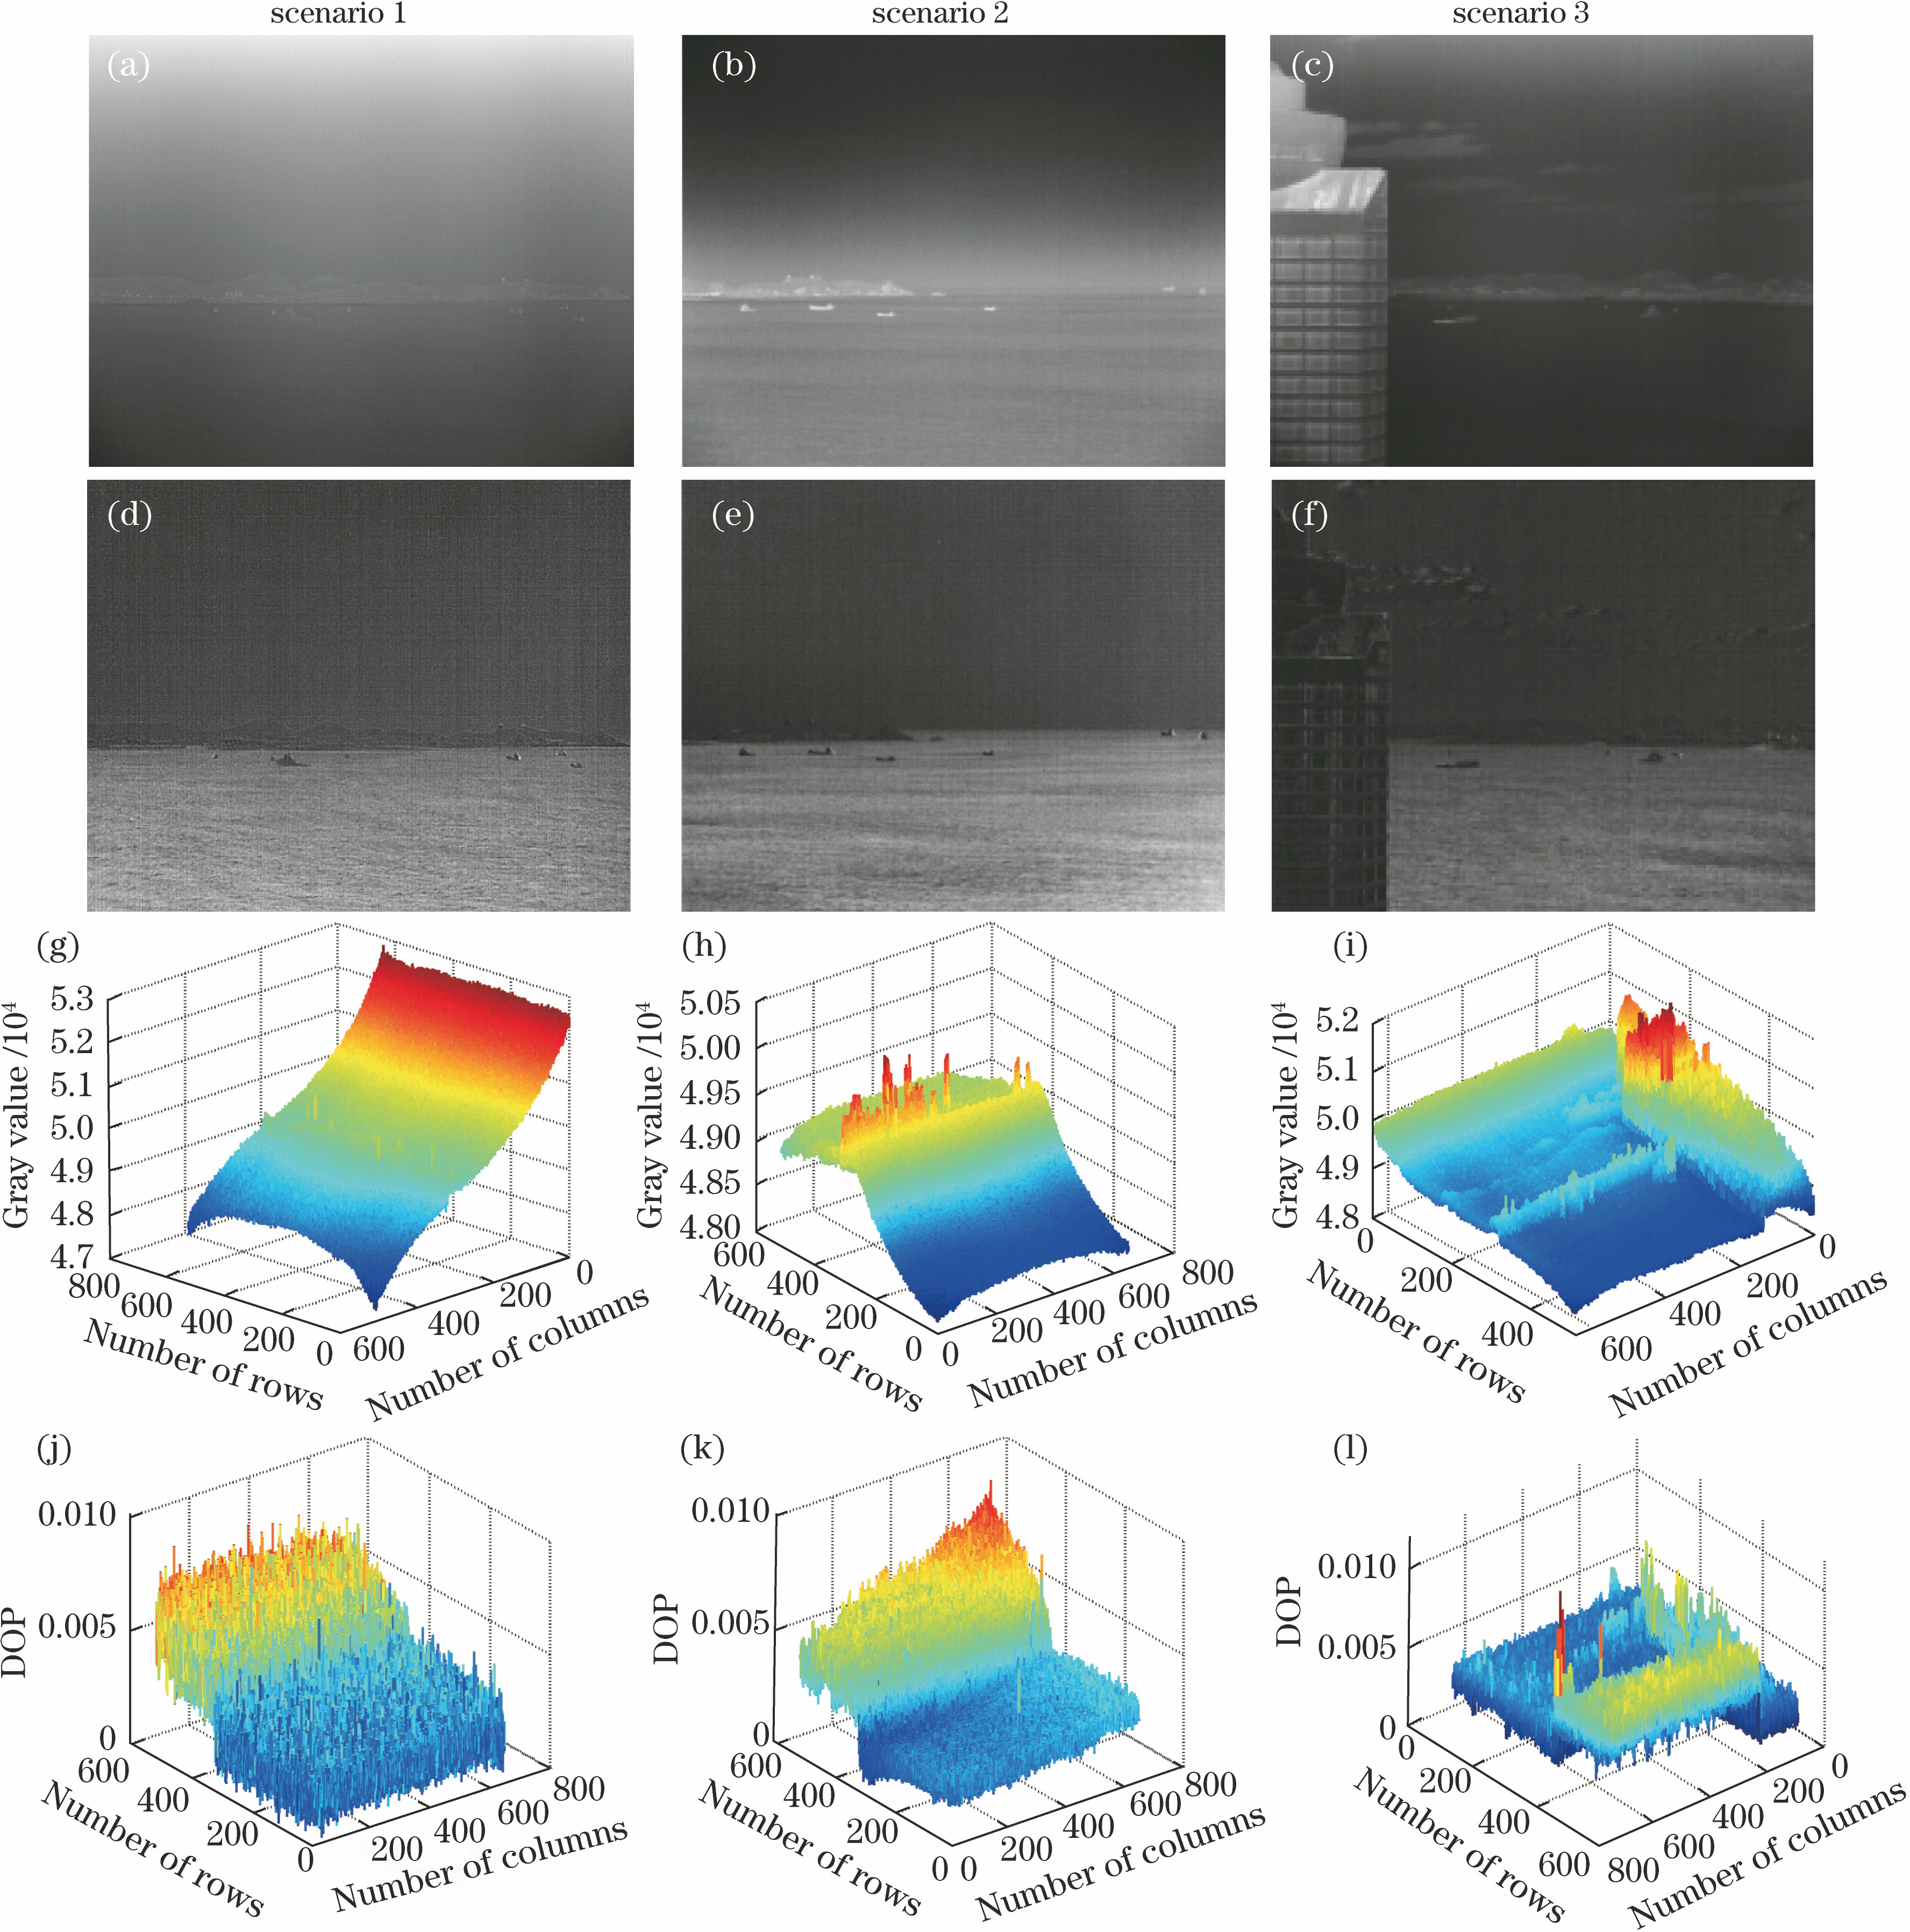 Infrared intensity and polarization degree images in different scenarios. (a)-(c) Infrared images; (d)-(f) infrared polarization degree images; (g)-(i) 3D images of infrared intensity; (j)-(l) 3D images of infrared polarization degree